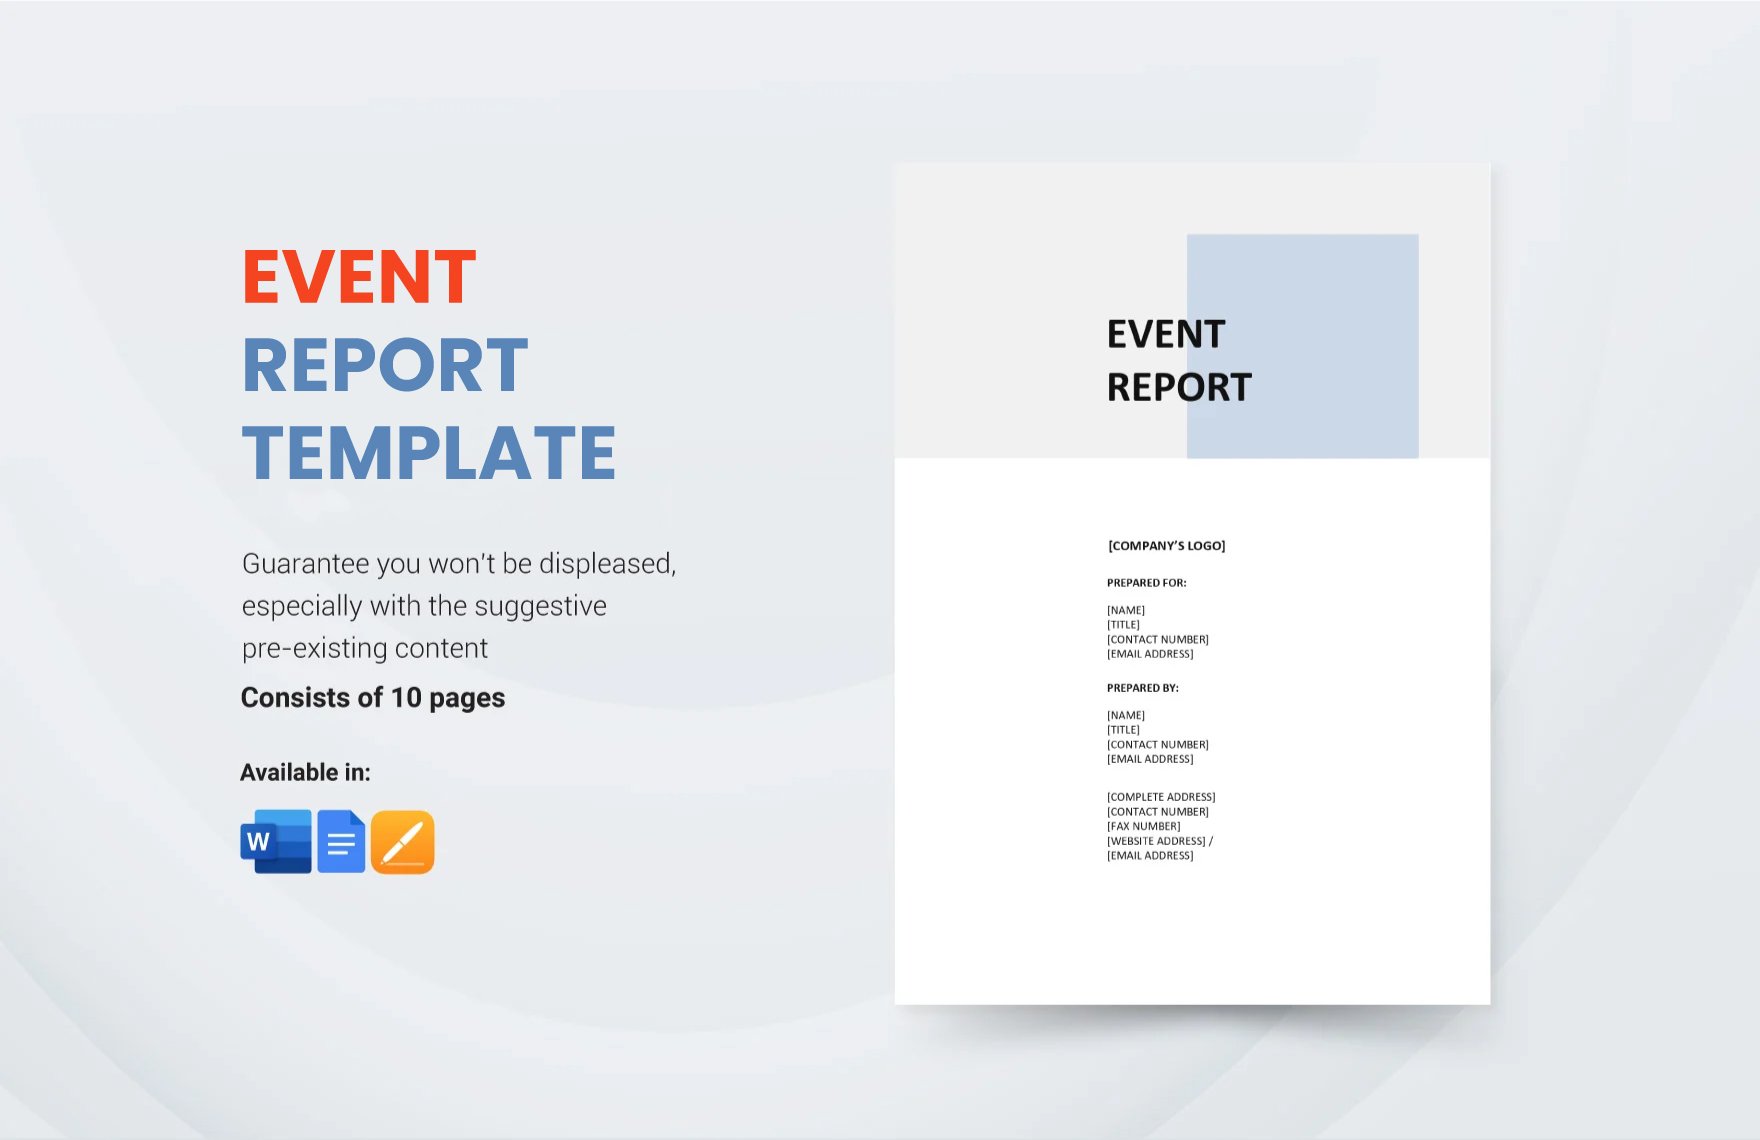 Event Report Template in Word, Google Docs, Apple Pages